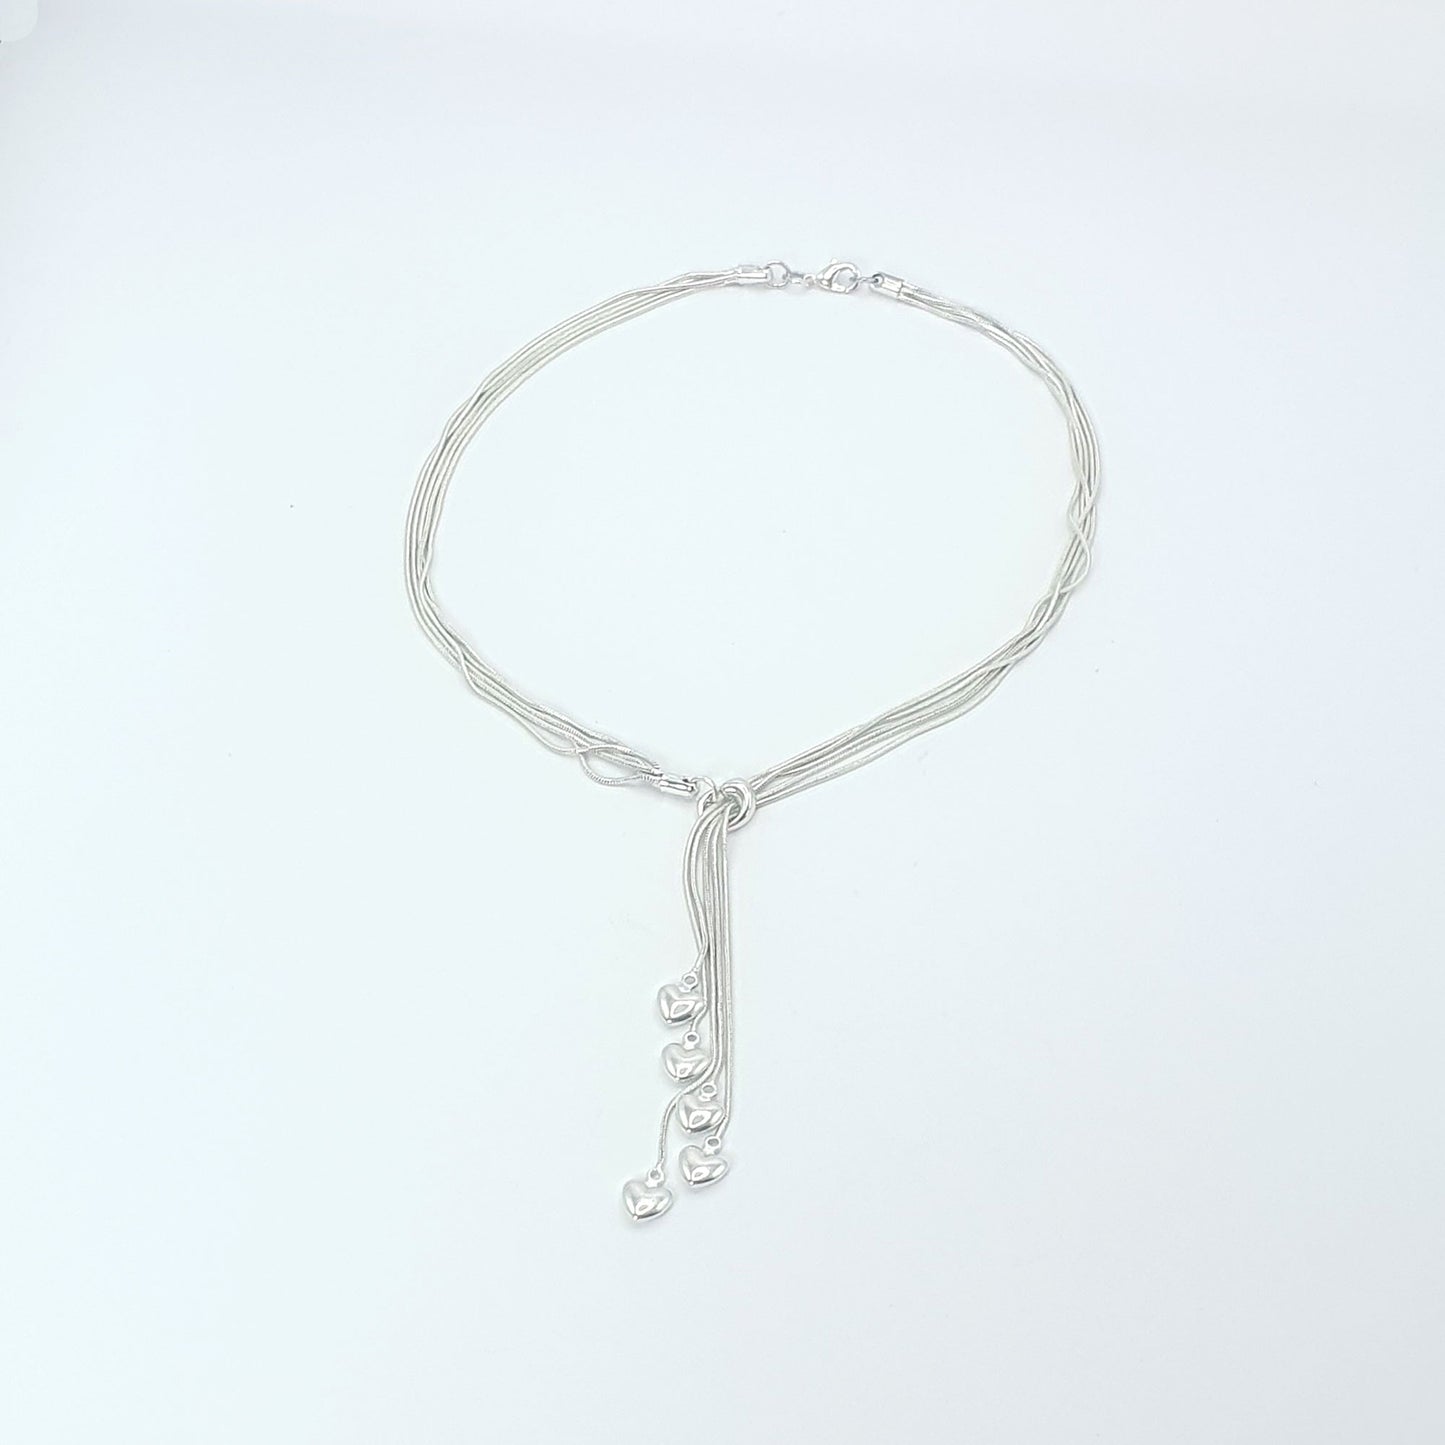 Five strands of silver plated chains with heart charms.